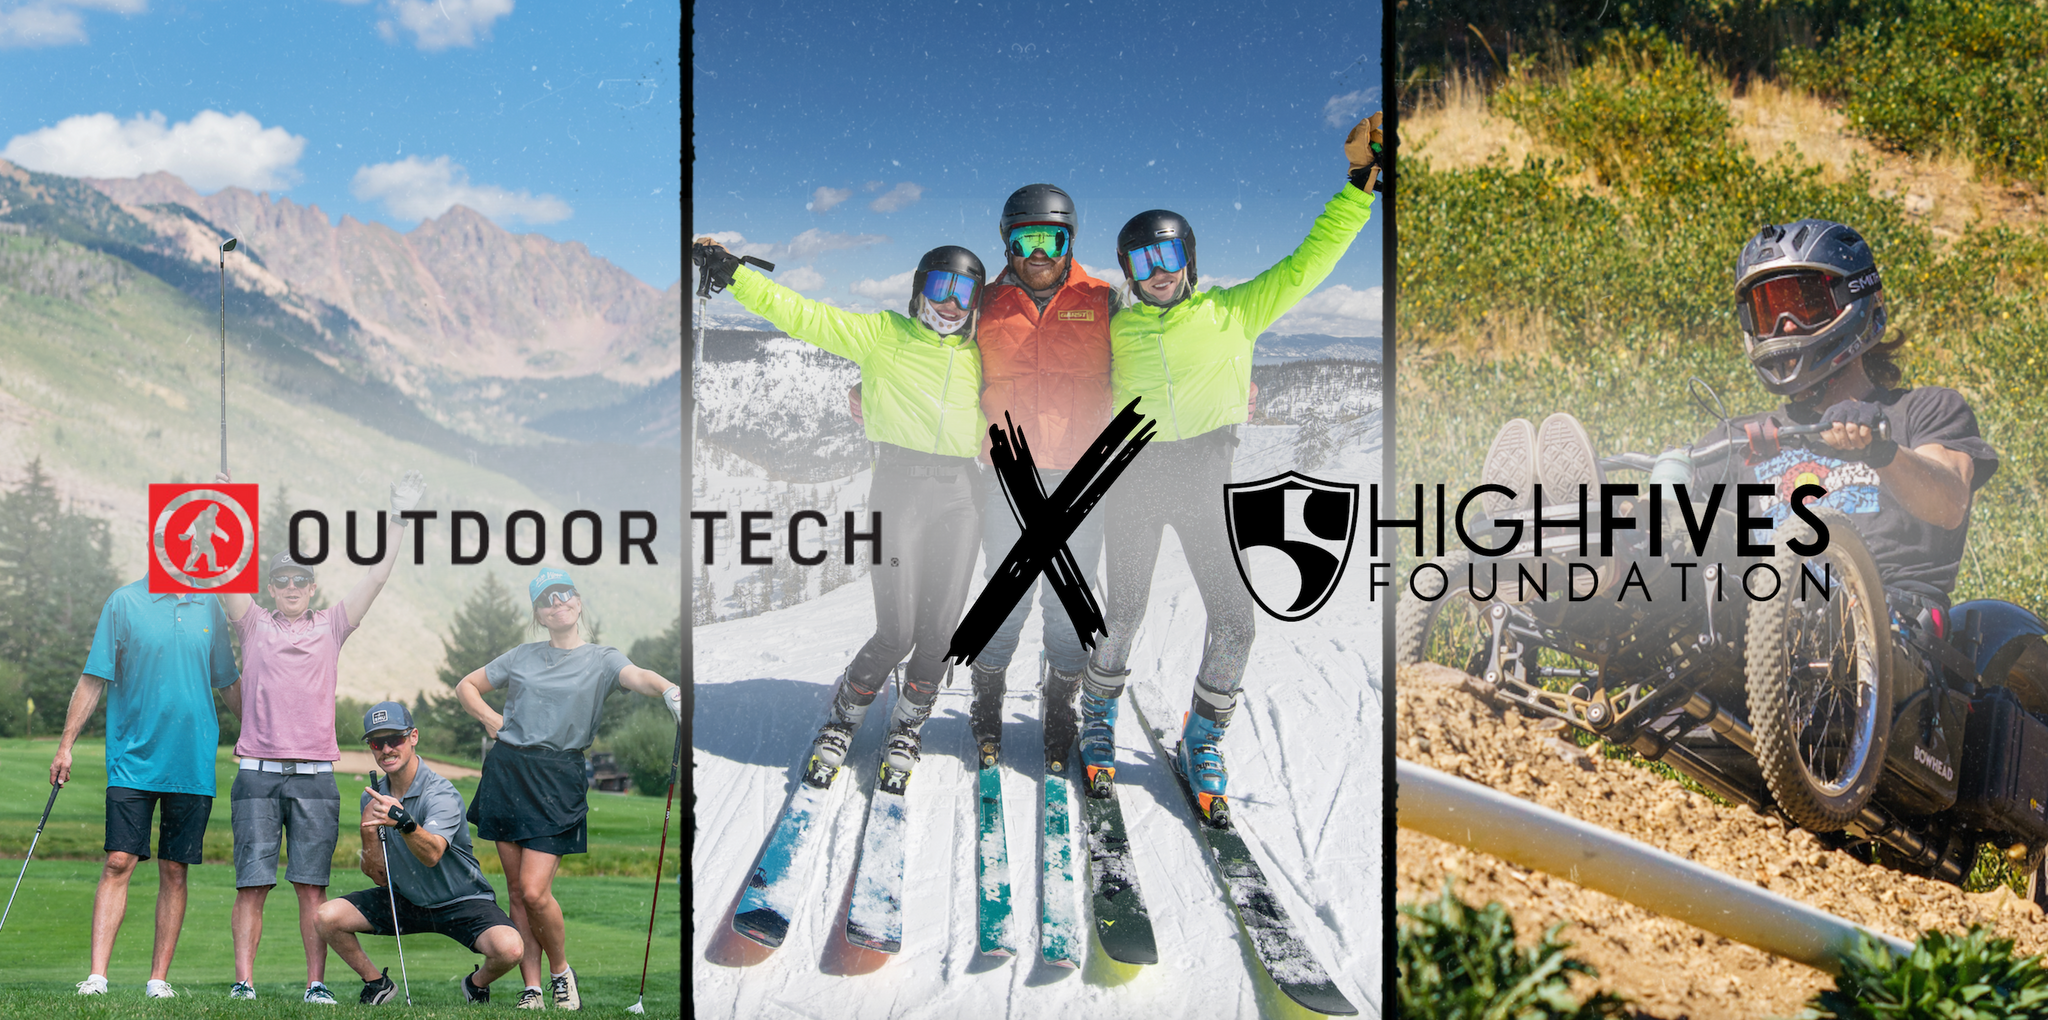 Adventure Meets Impact: Outdoor Tech's High-Five (Foundation) to Making a Difference